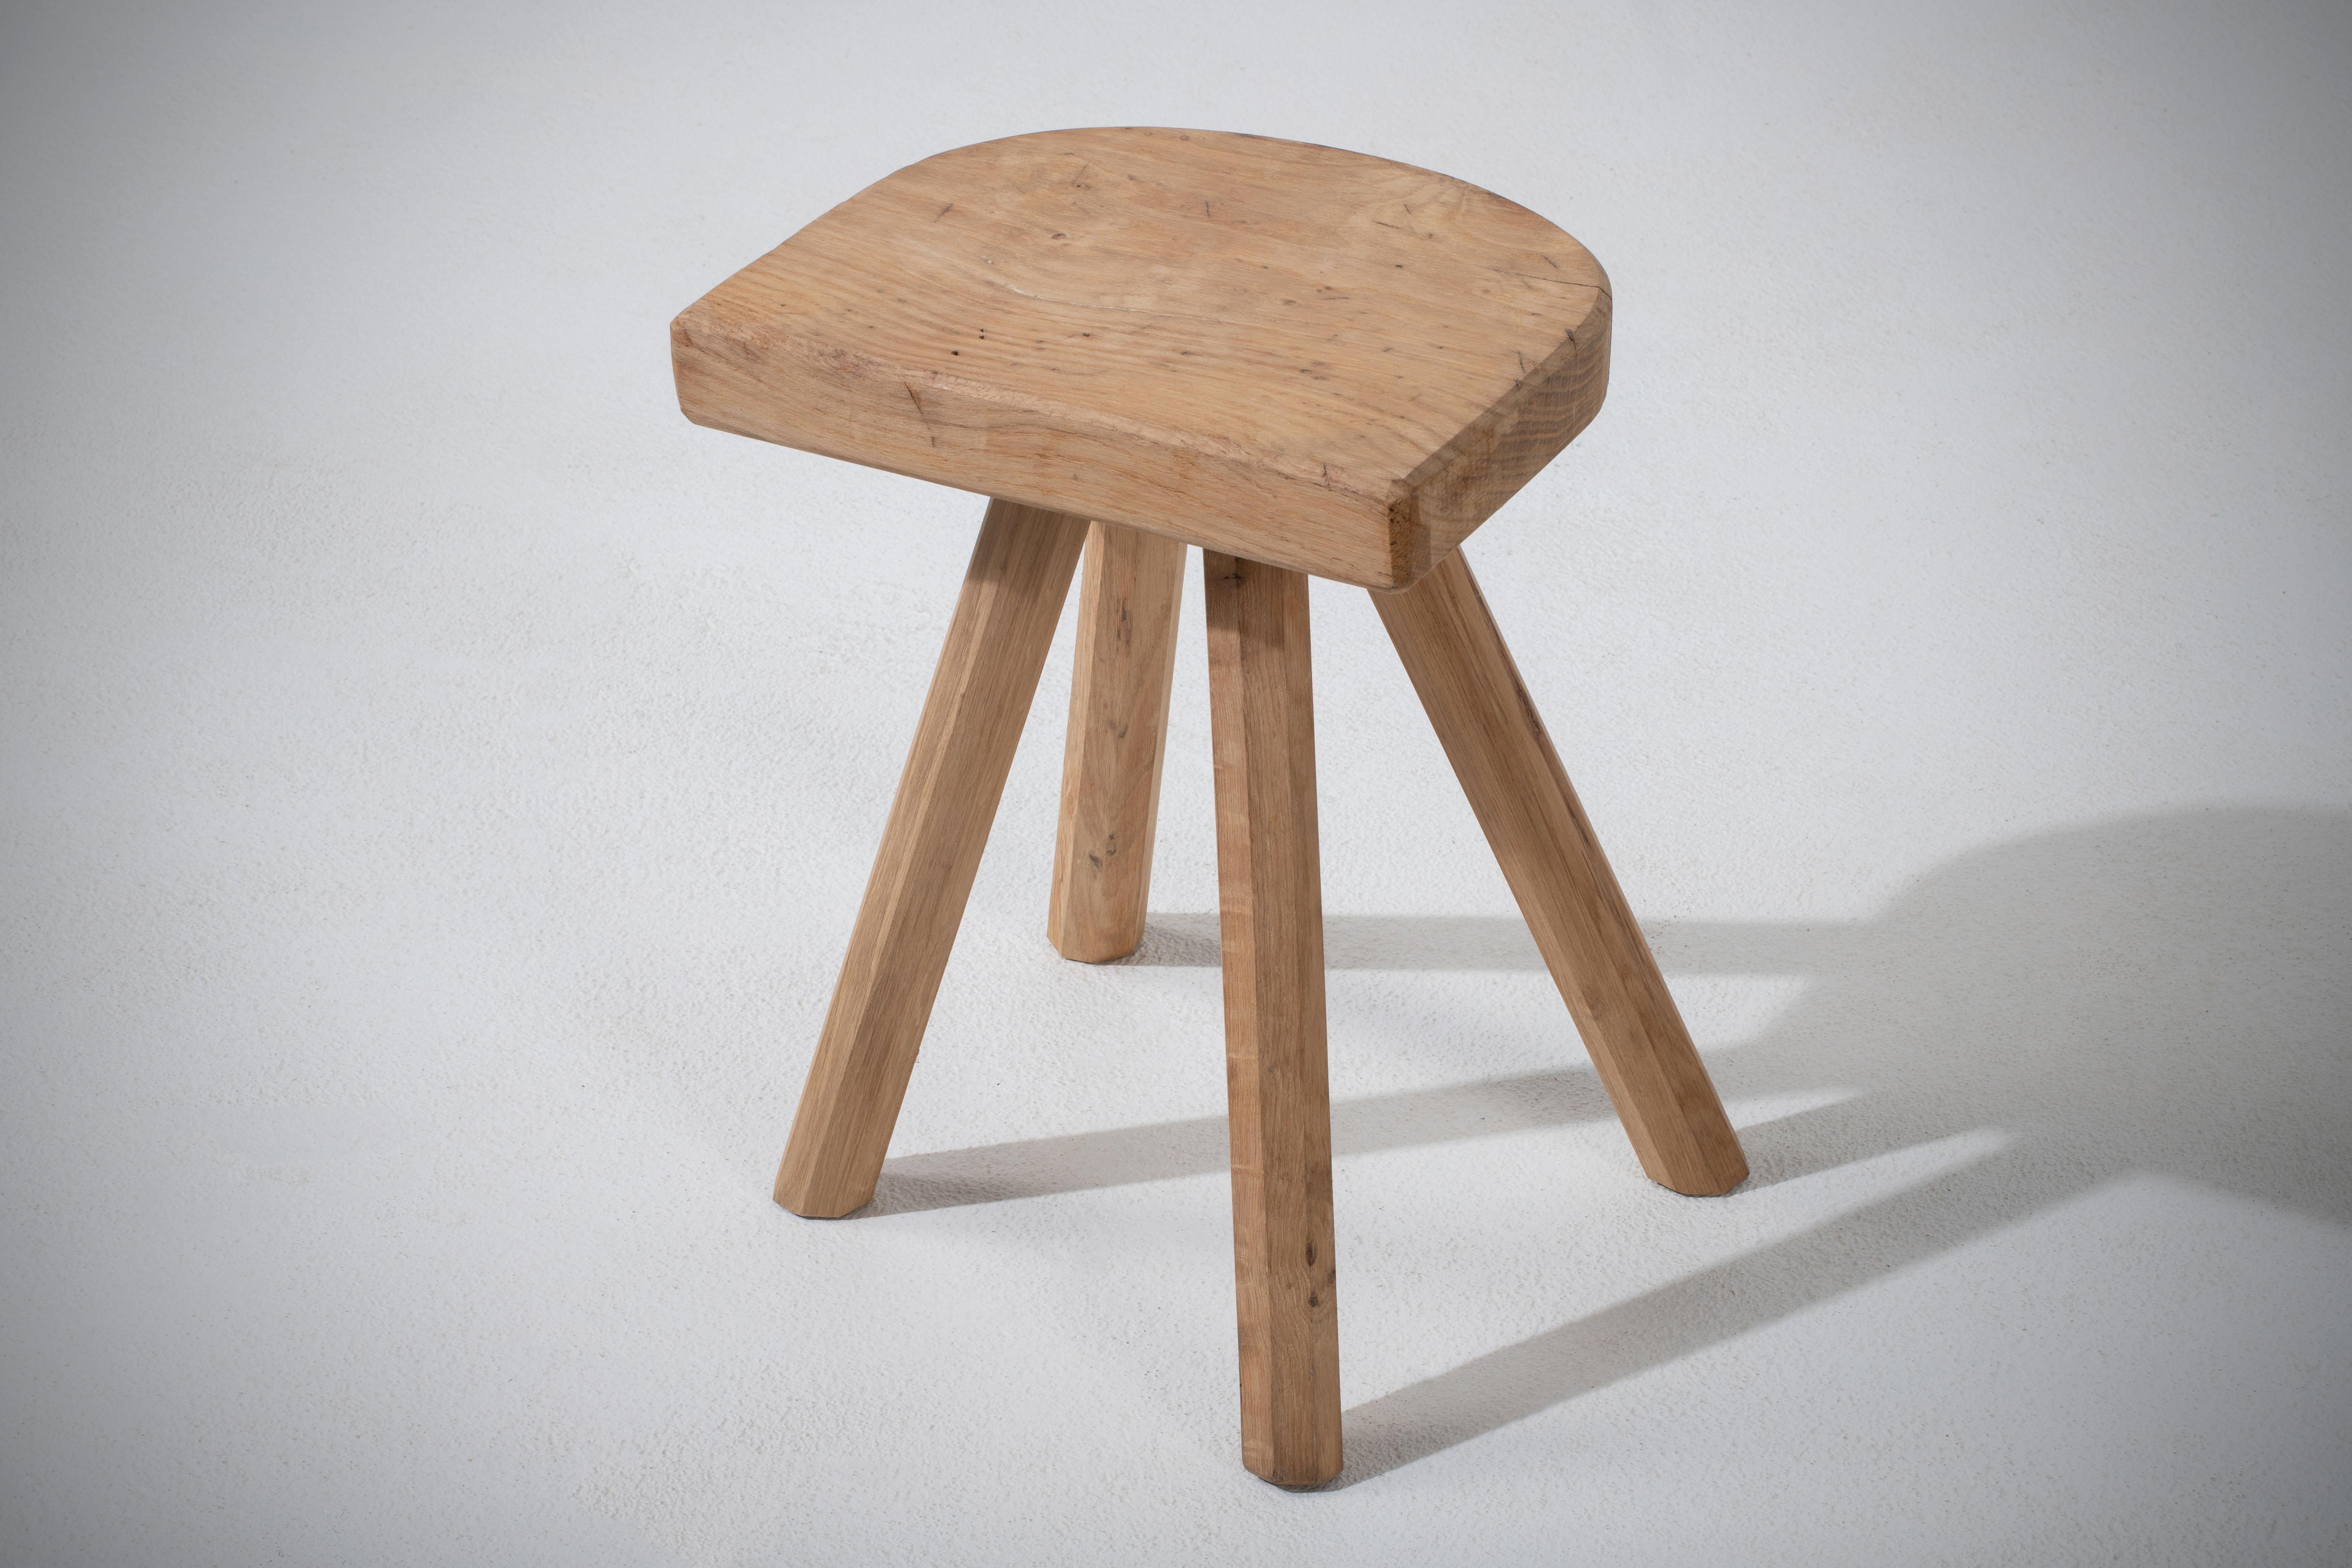 French Midcentury Oak Stool, Tripod Flared Feet, 1920s For Sale 6